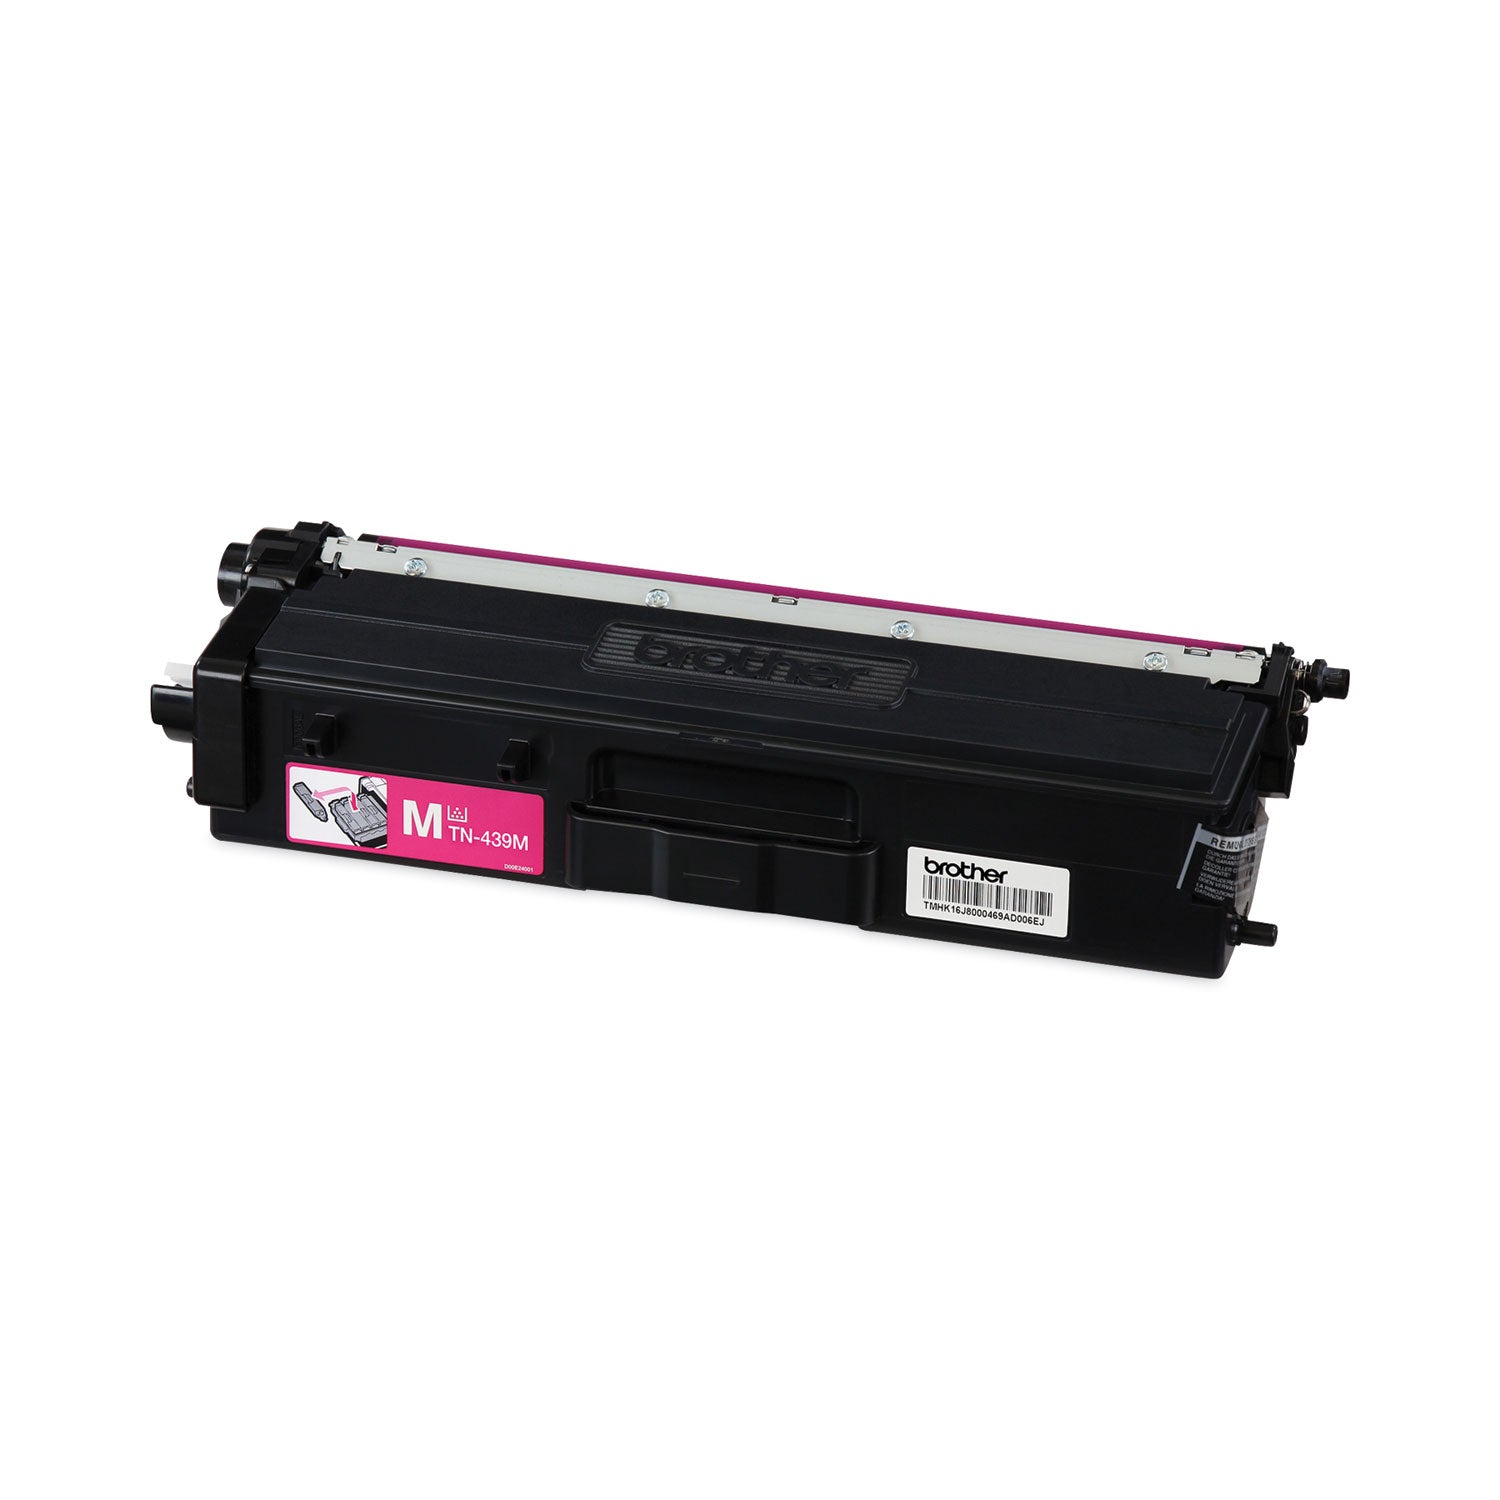 Brother TN439M Original Ultra High Yield Laser Toner Cartridge - Magenta - 1 Each - 9000 Pages - 5